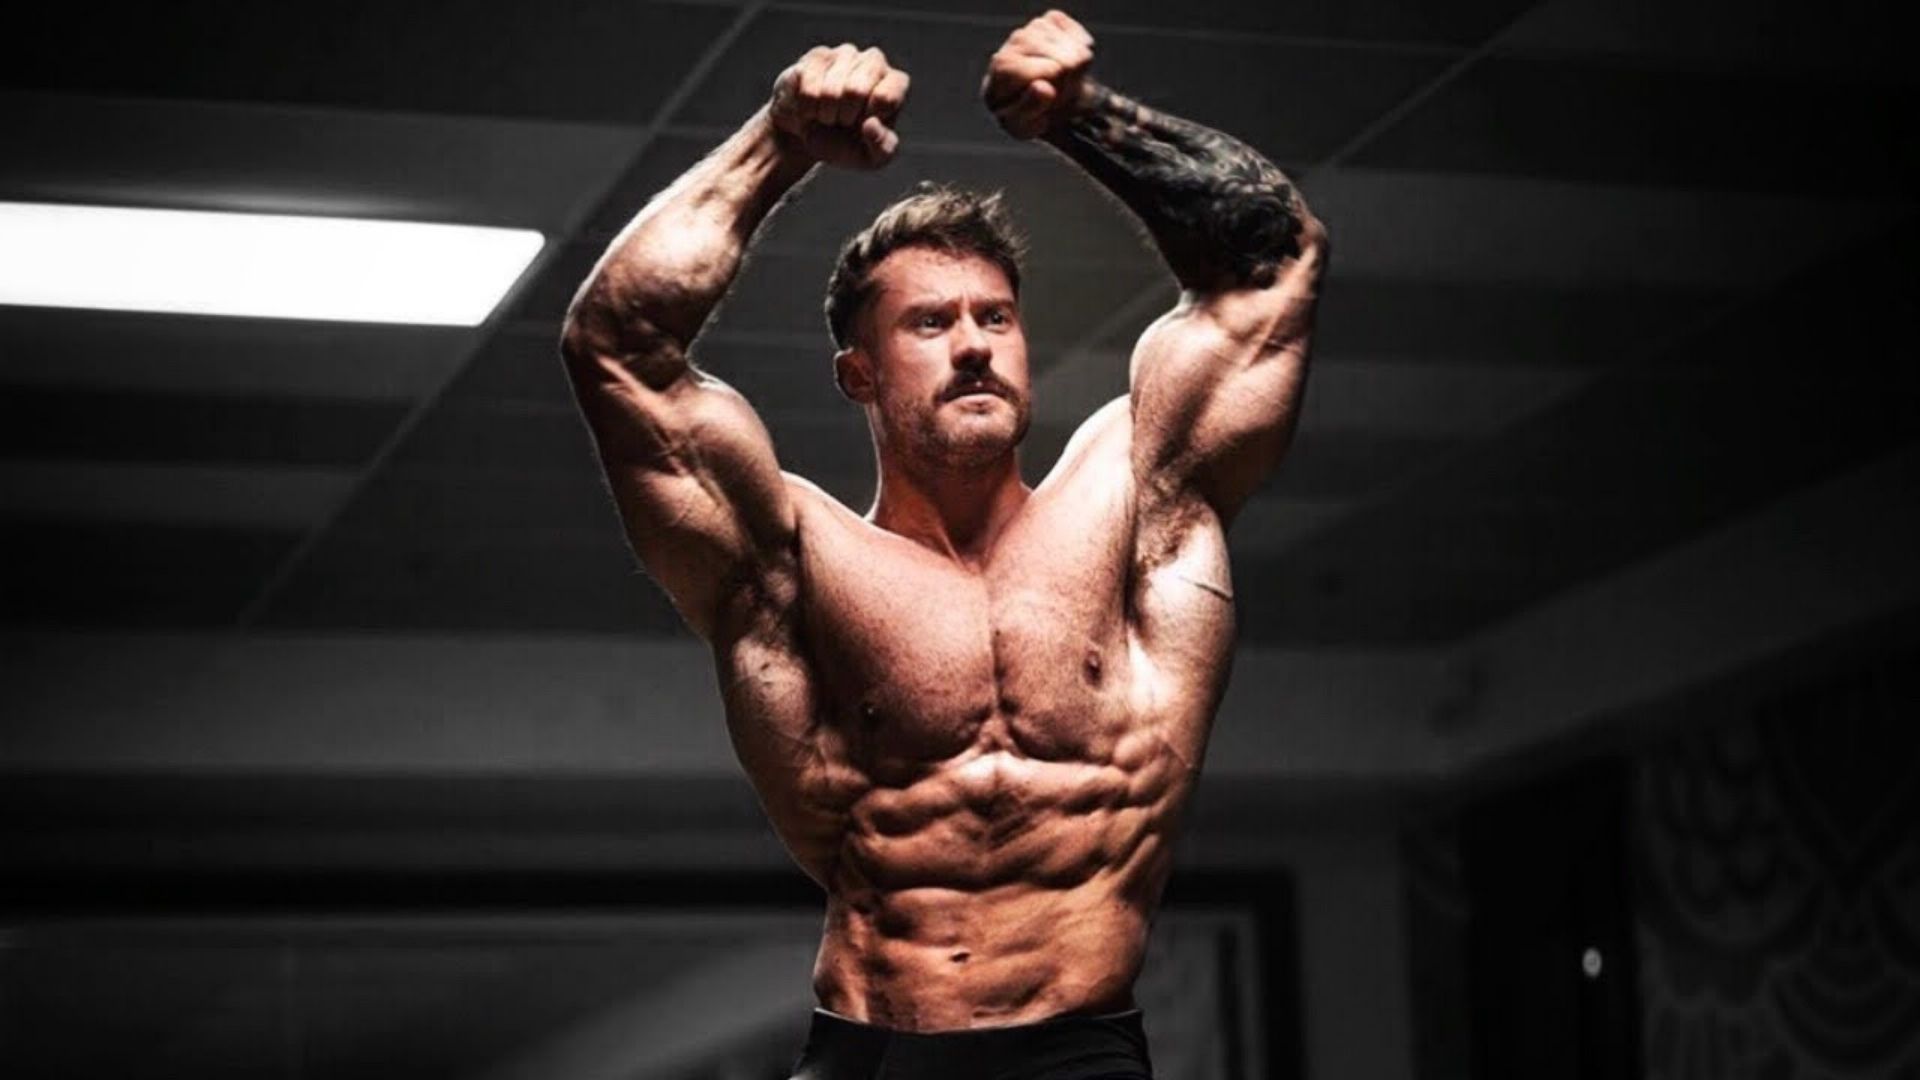 Chris Bumstead Steroids: Is He Natural or Not?